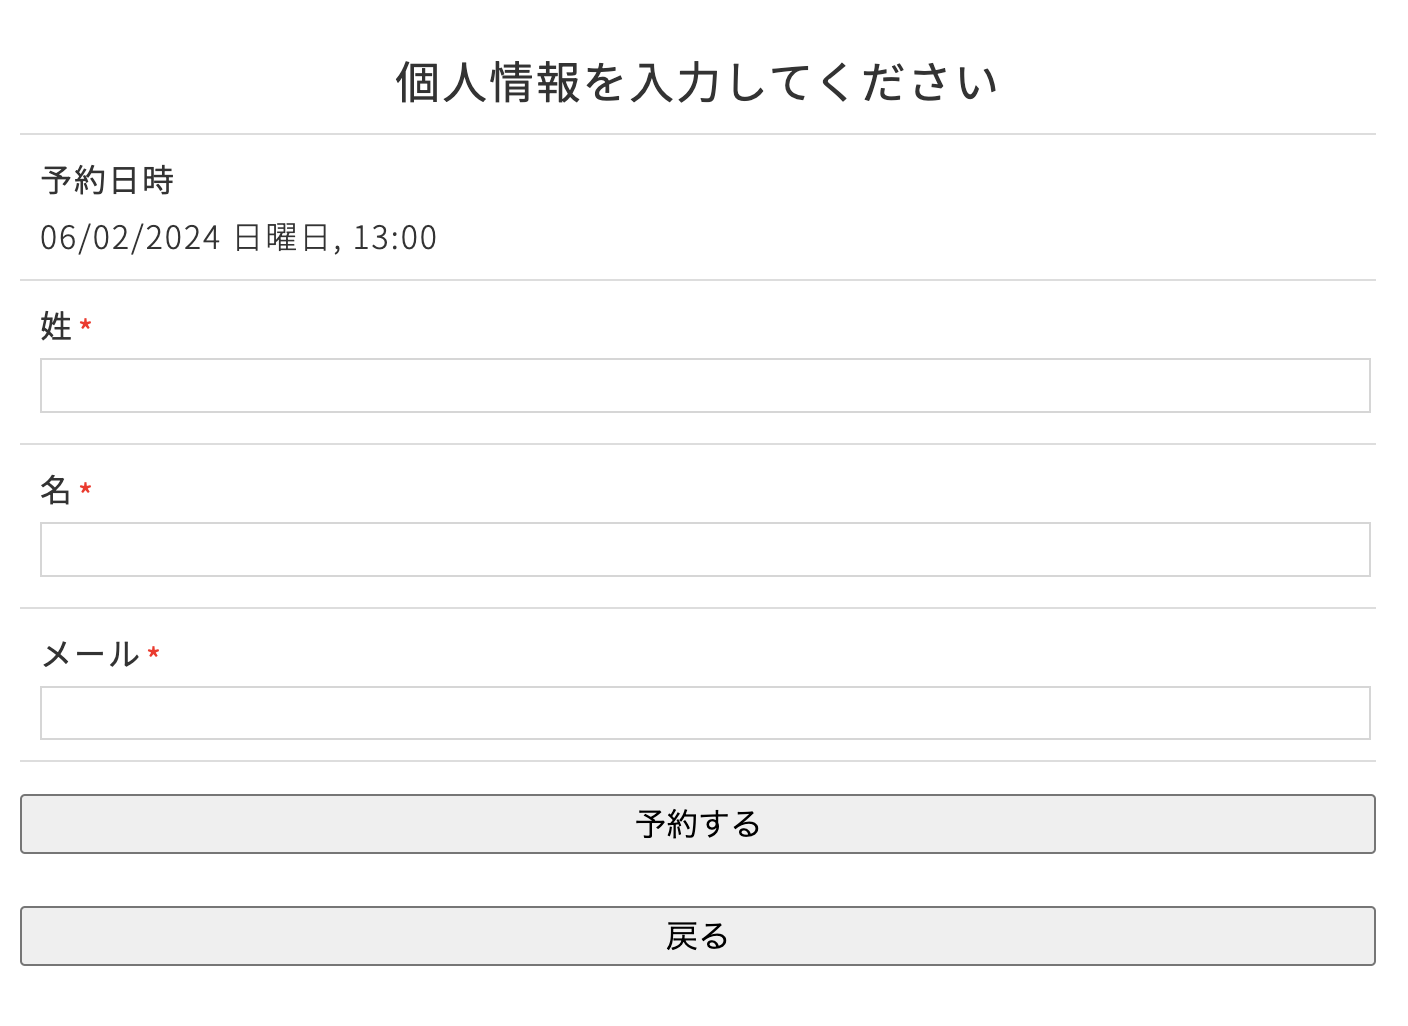 Booking Package SAASPROJECTの個人情報入力画面